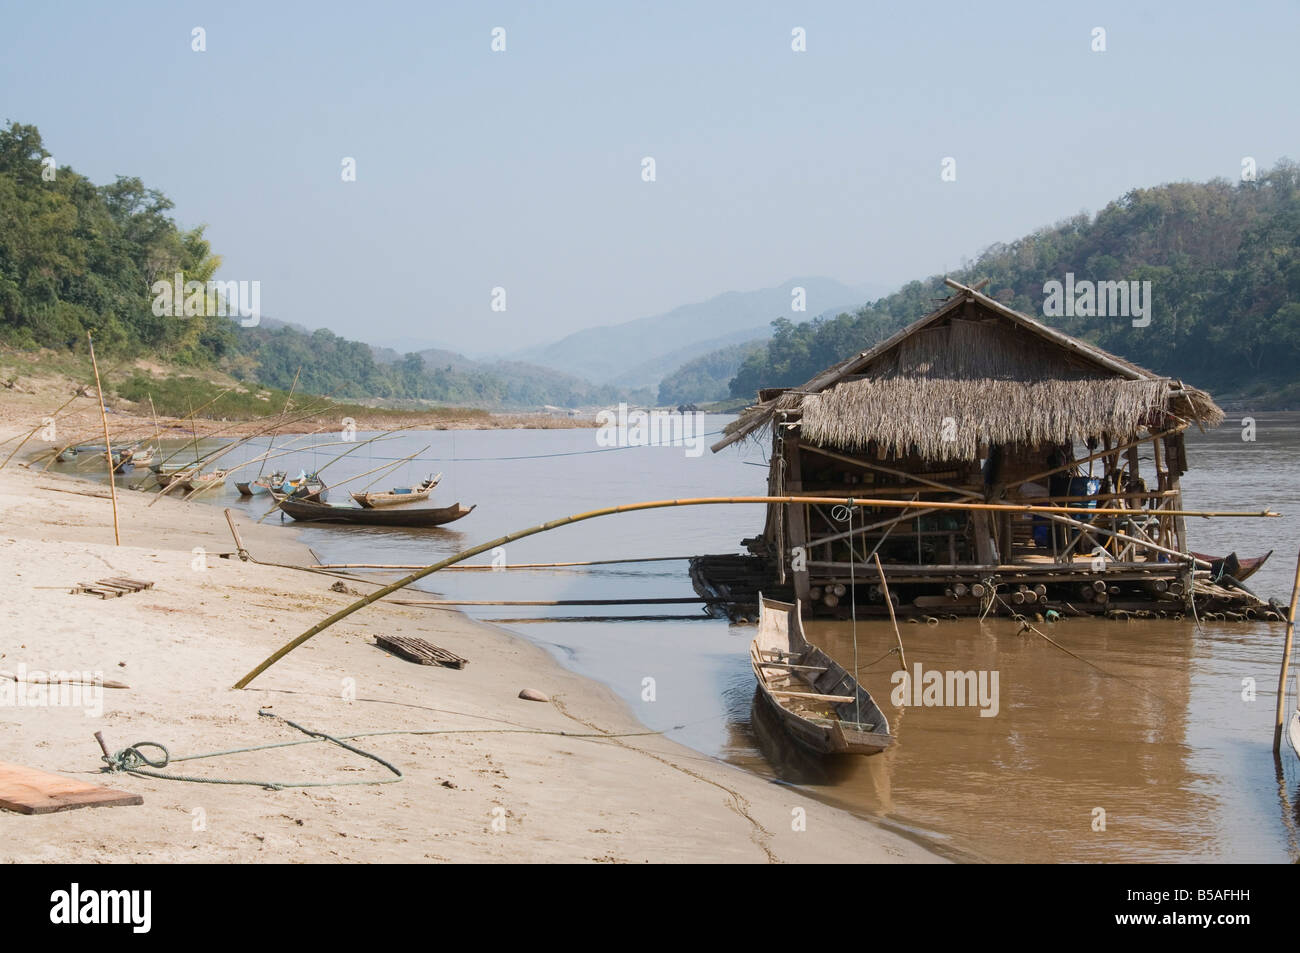 Floating shop on Mekong River, near village, Laos, Indochina, Southeast Asia Stock Photo